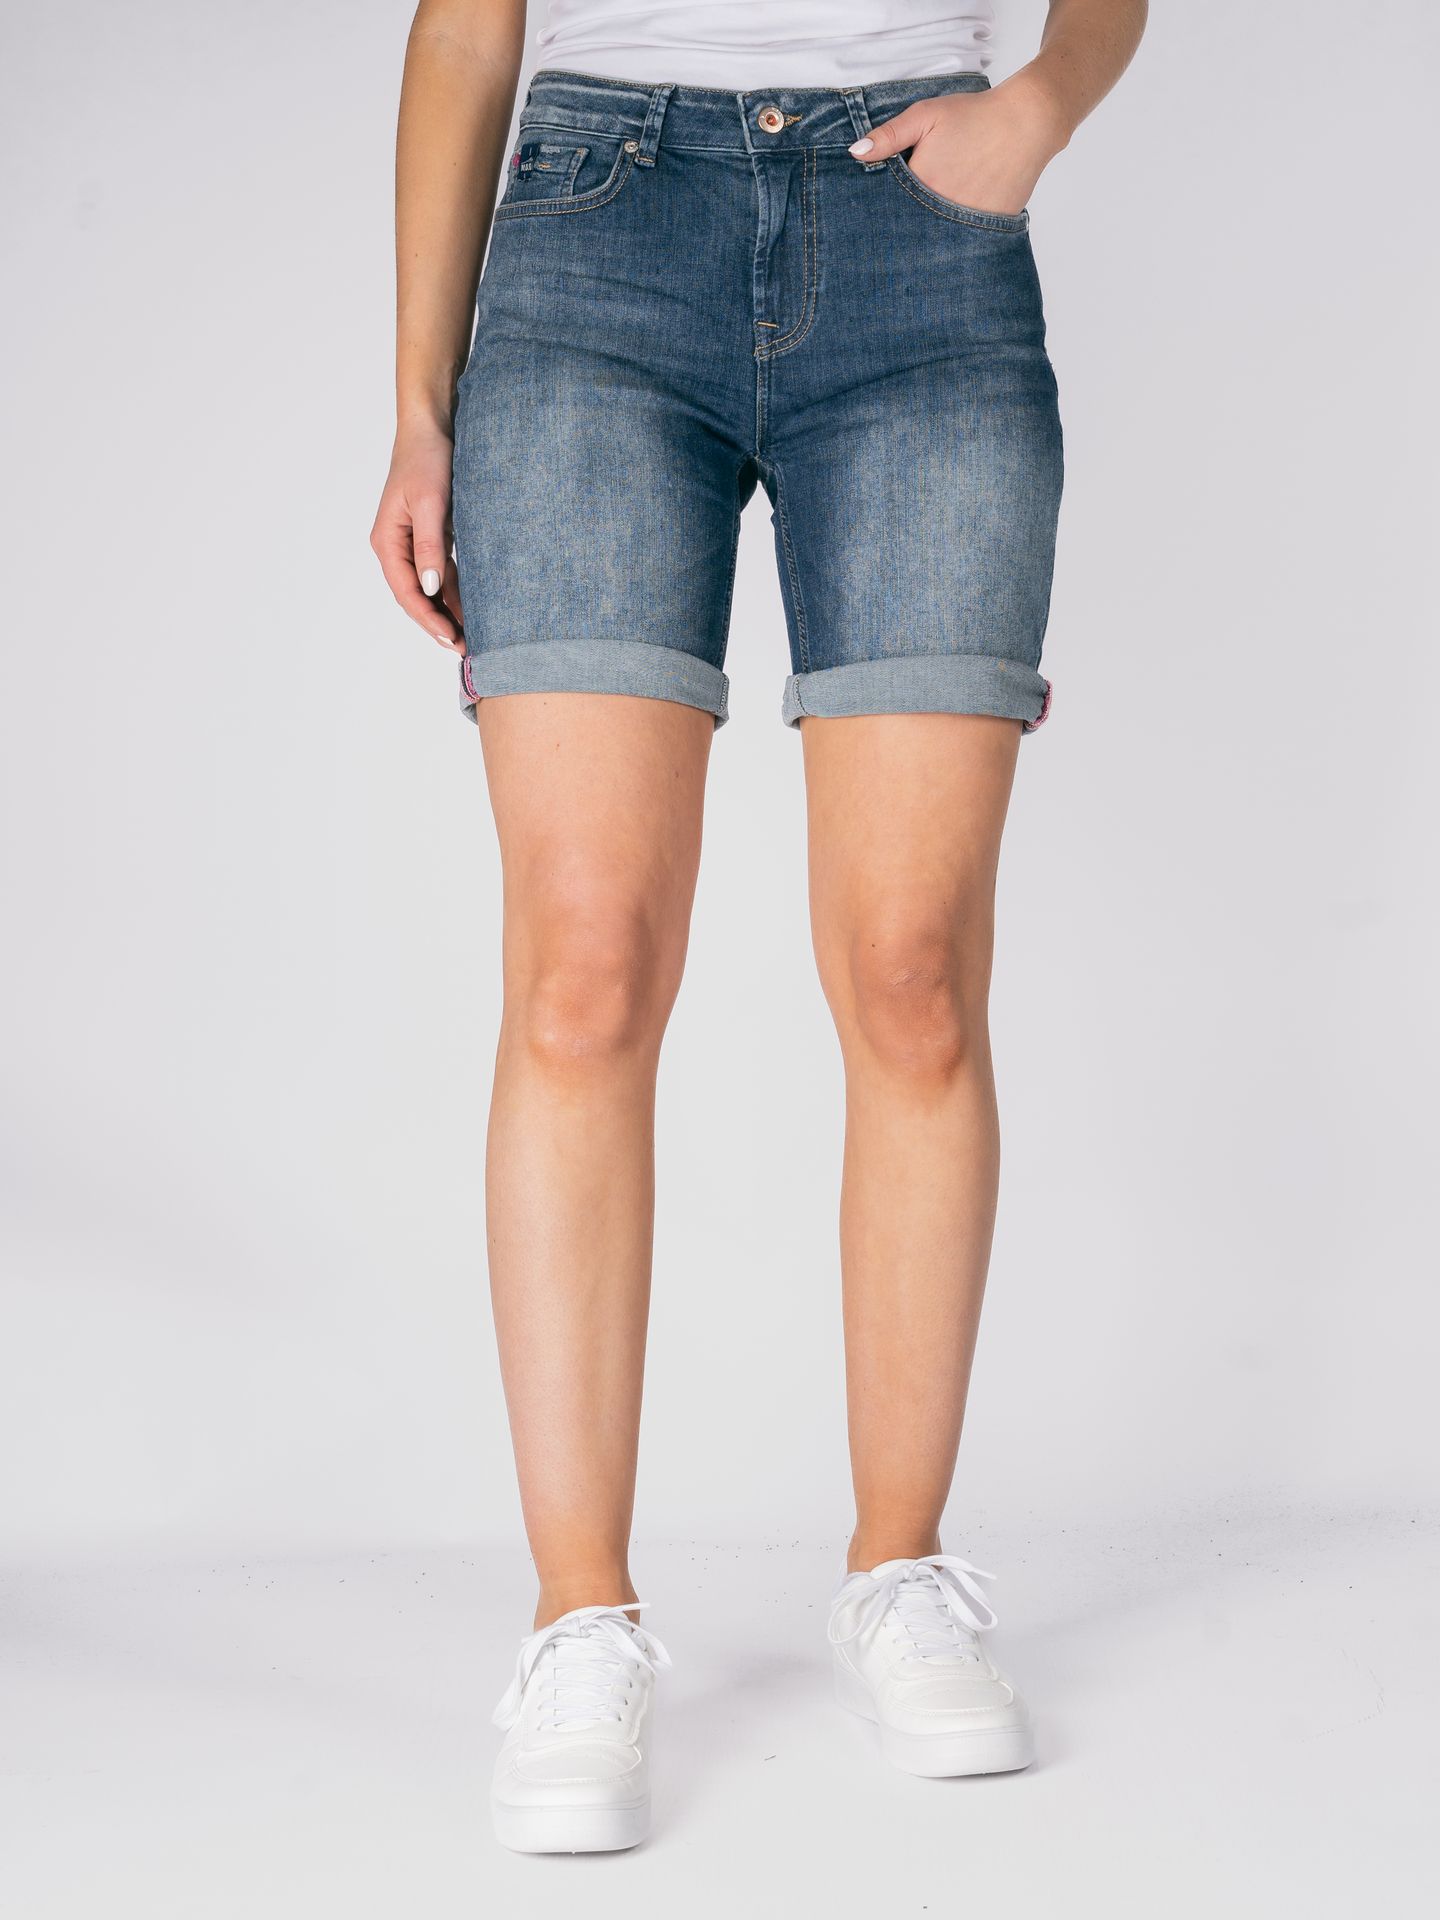 Miracle of Denim Lucky shorts 1011 Air blue 00108782-1011